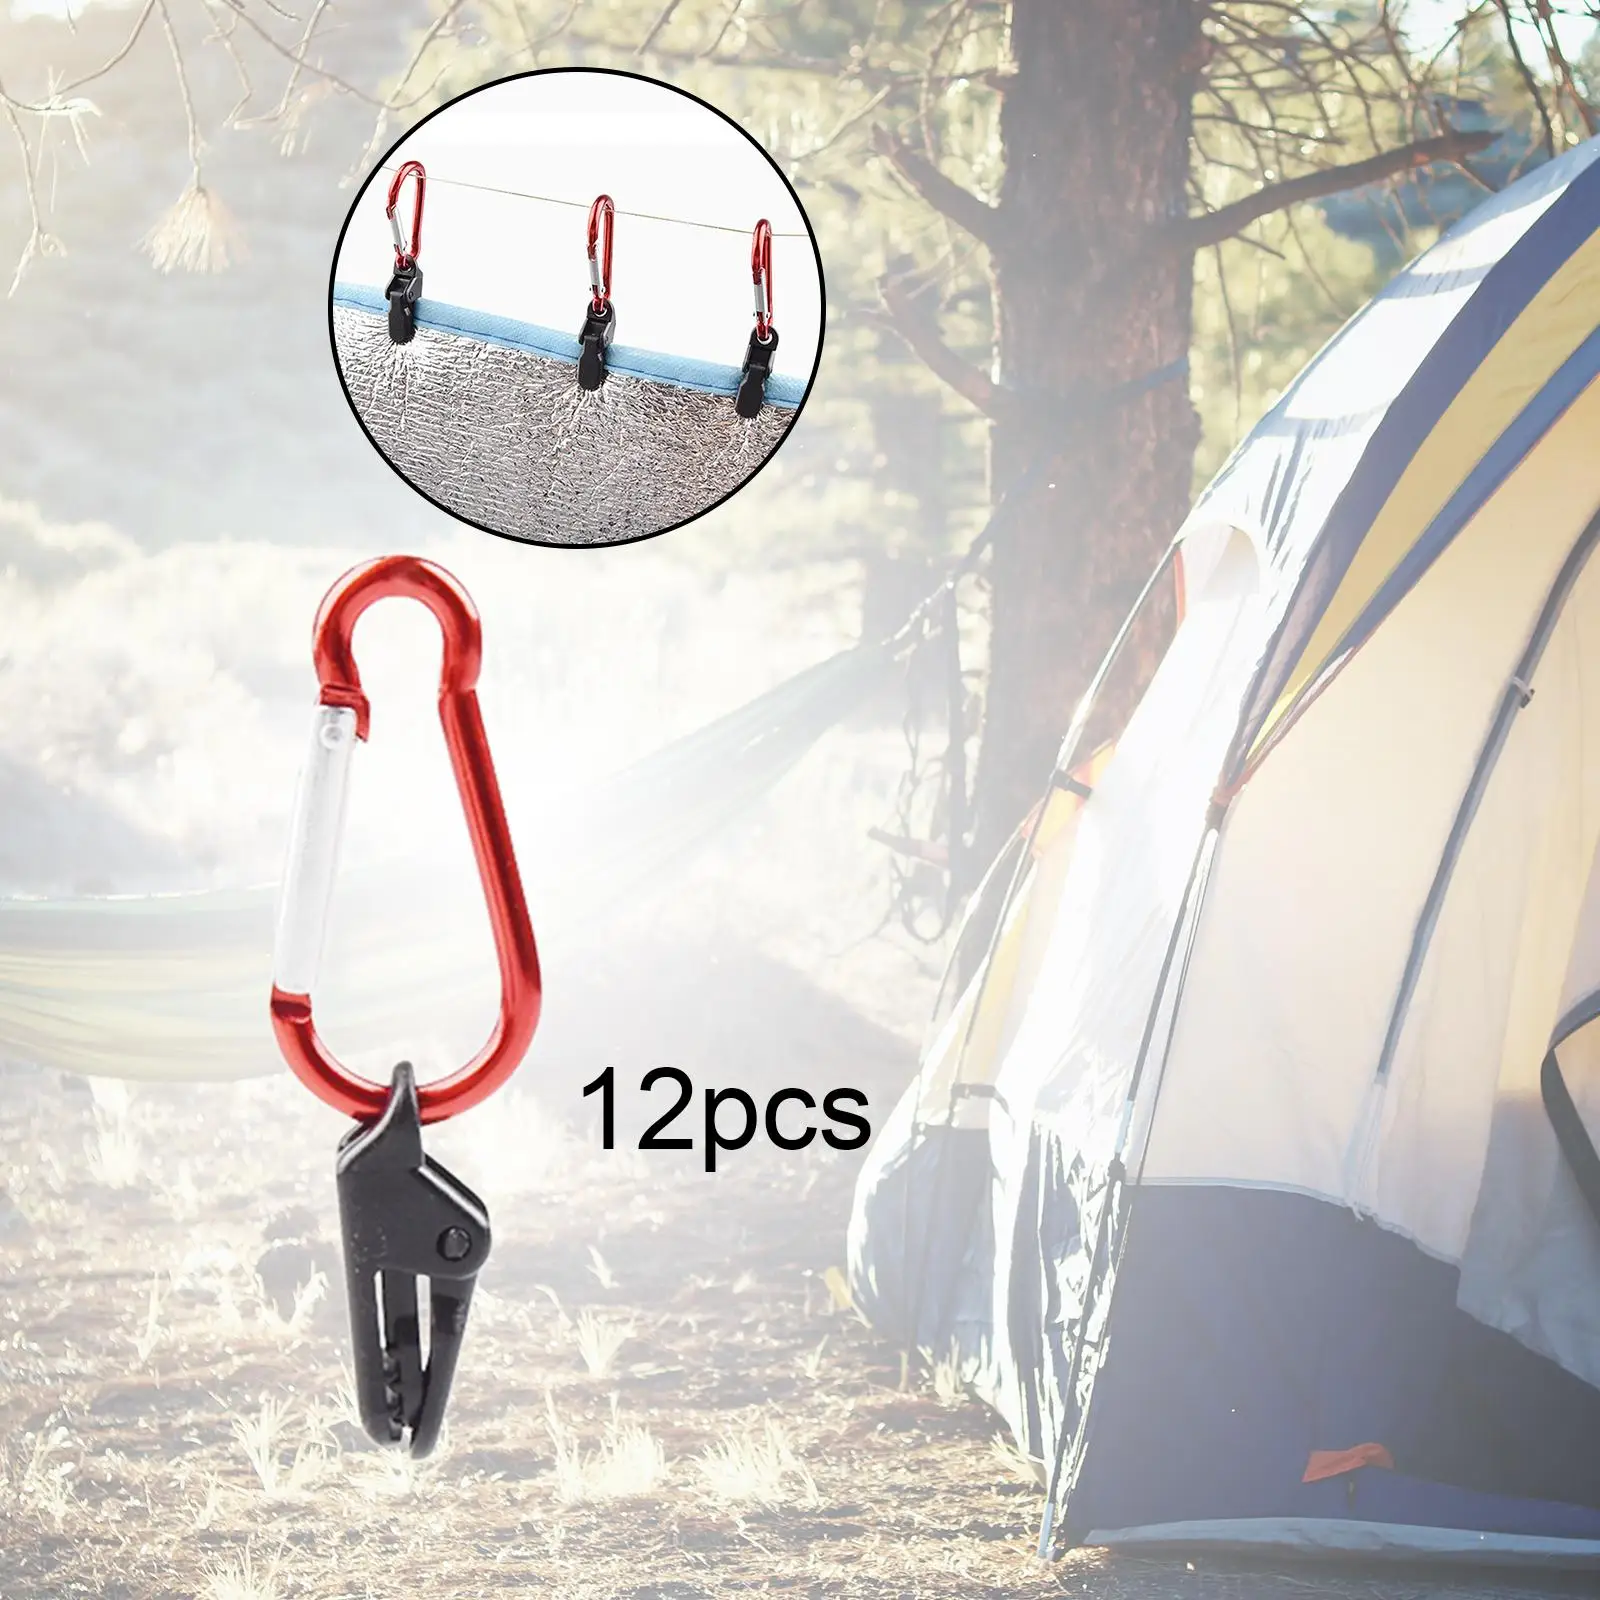 12 Pieces Camping Tent Snaps Clip with Carabiner Waterproof Versatile Practical Tent Accessories Awning Clamp for Awning